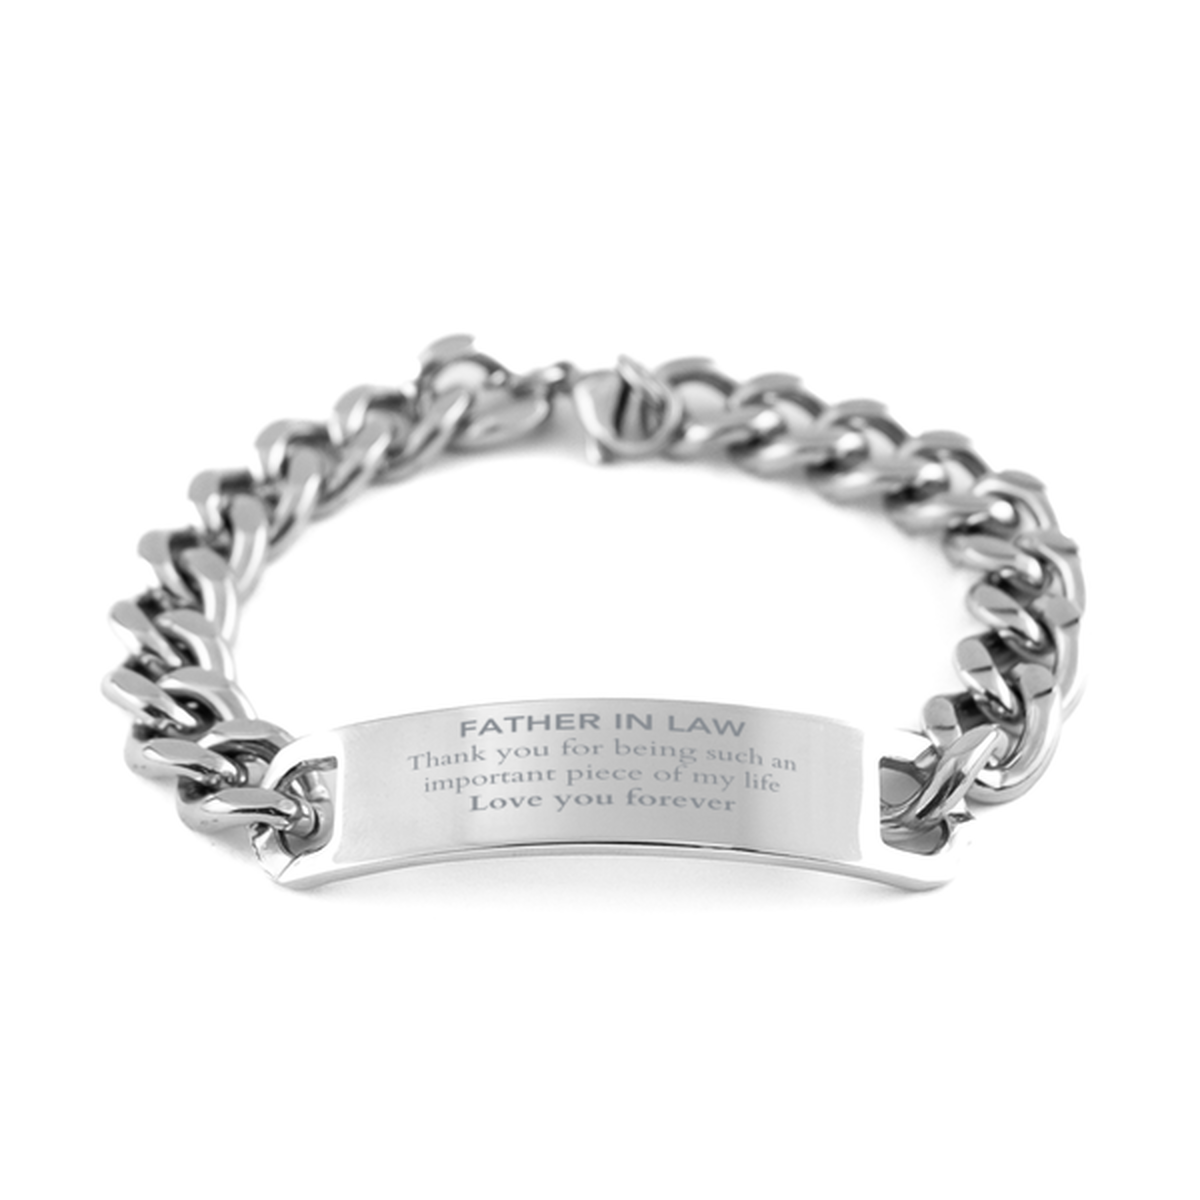 Appropriate Father In Law Cuban Chain Stainless Steel Bracelet Epic Birthday Gifts for Father In Law Thank you for being such an important piece of my life Father In Law Christmas Mothers Fathers Day